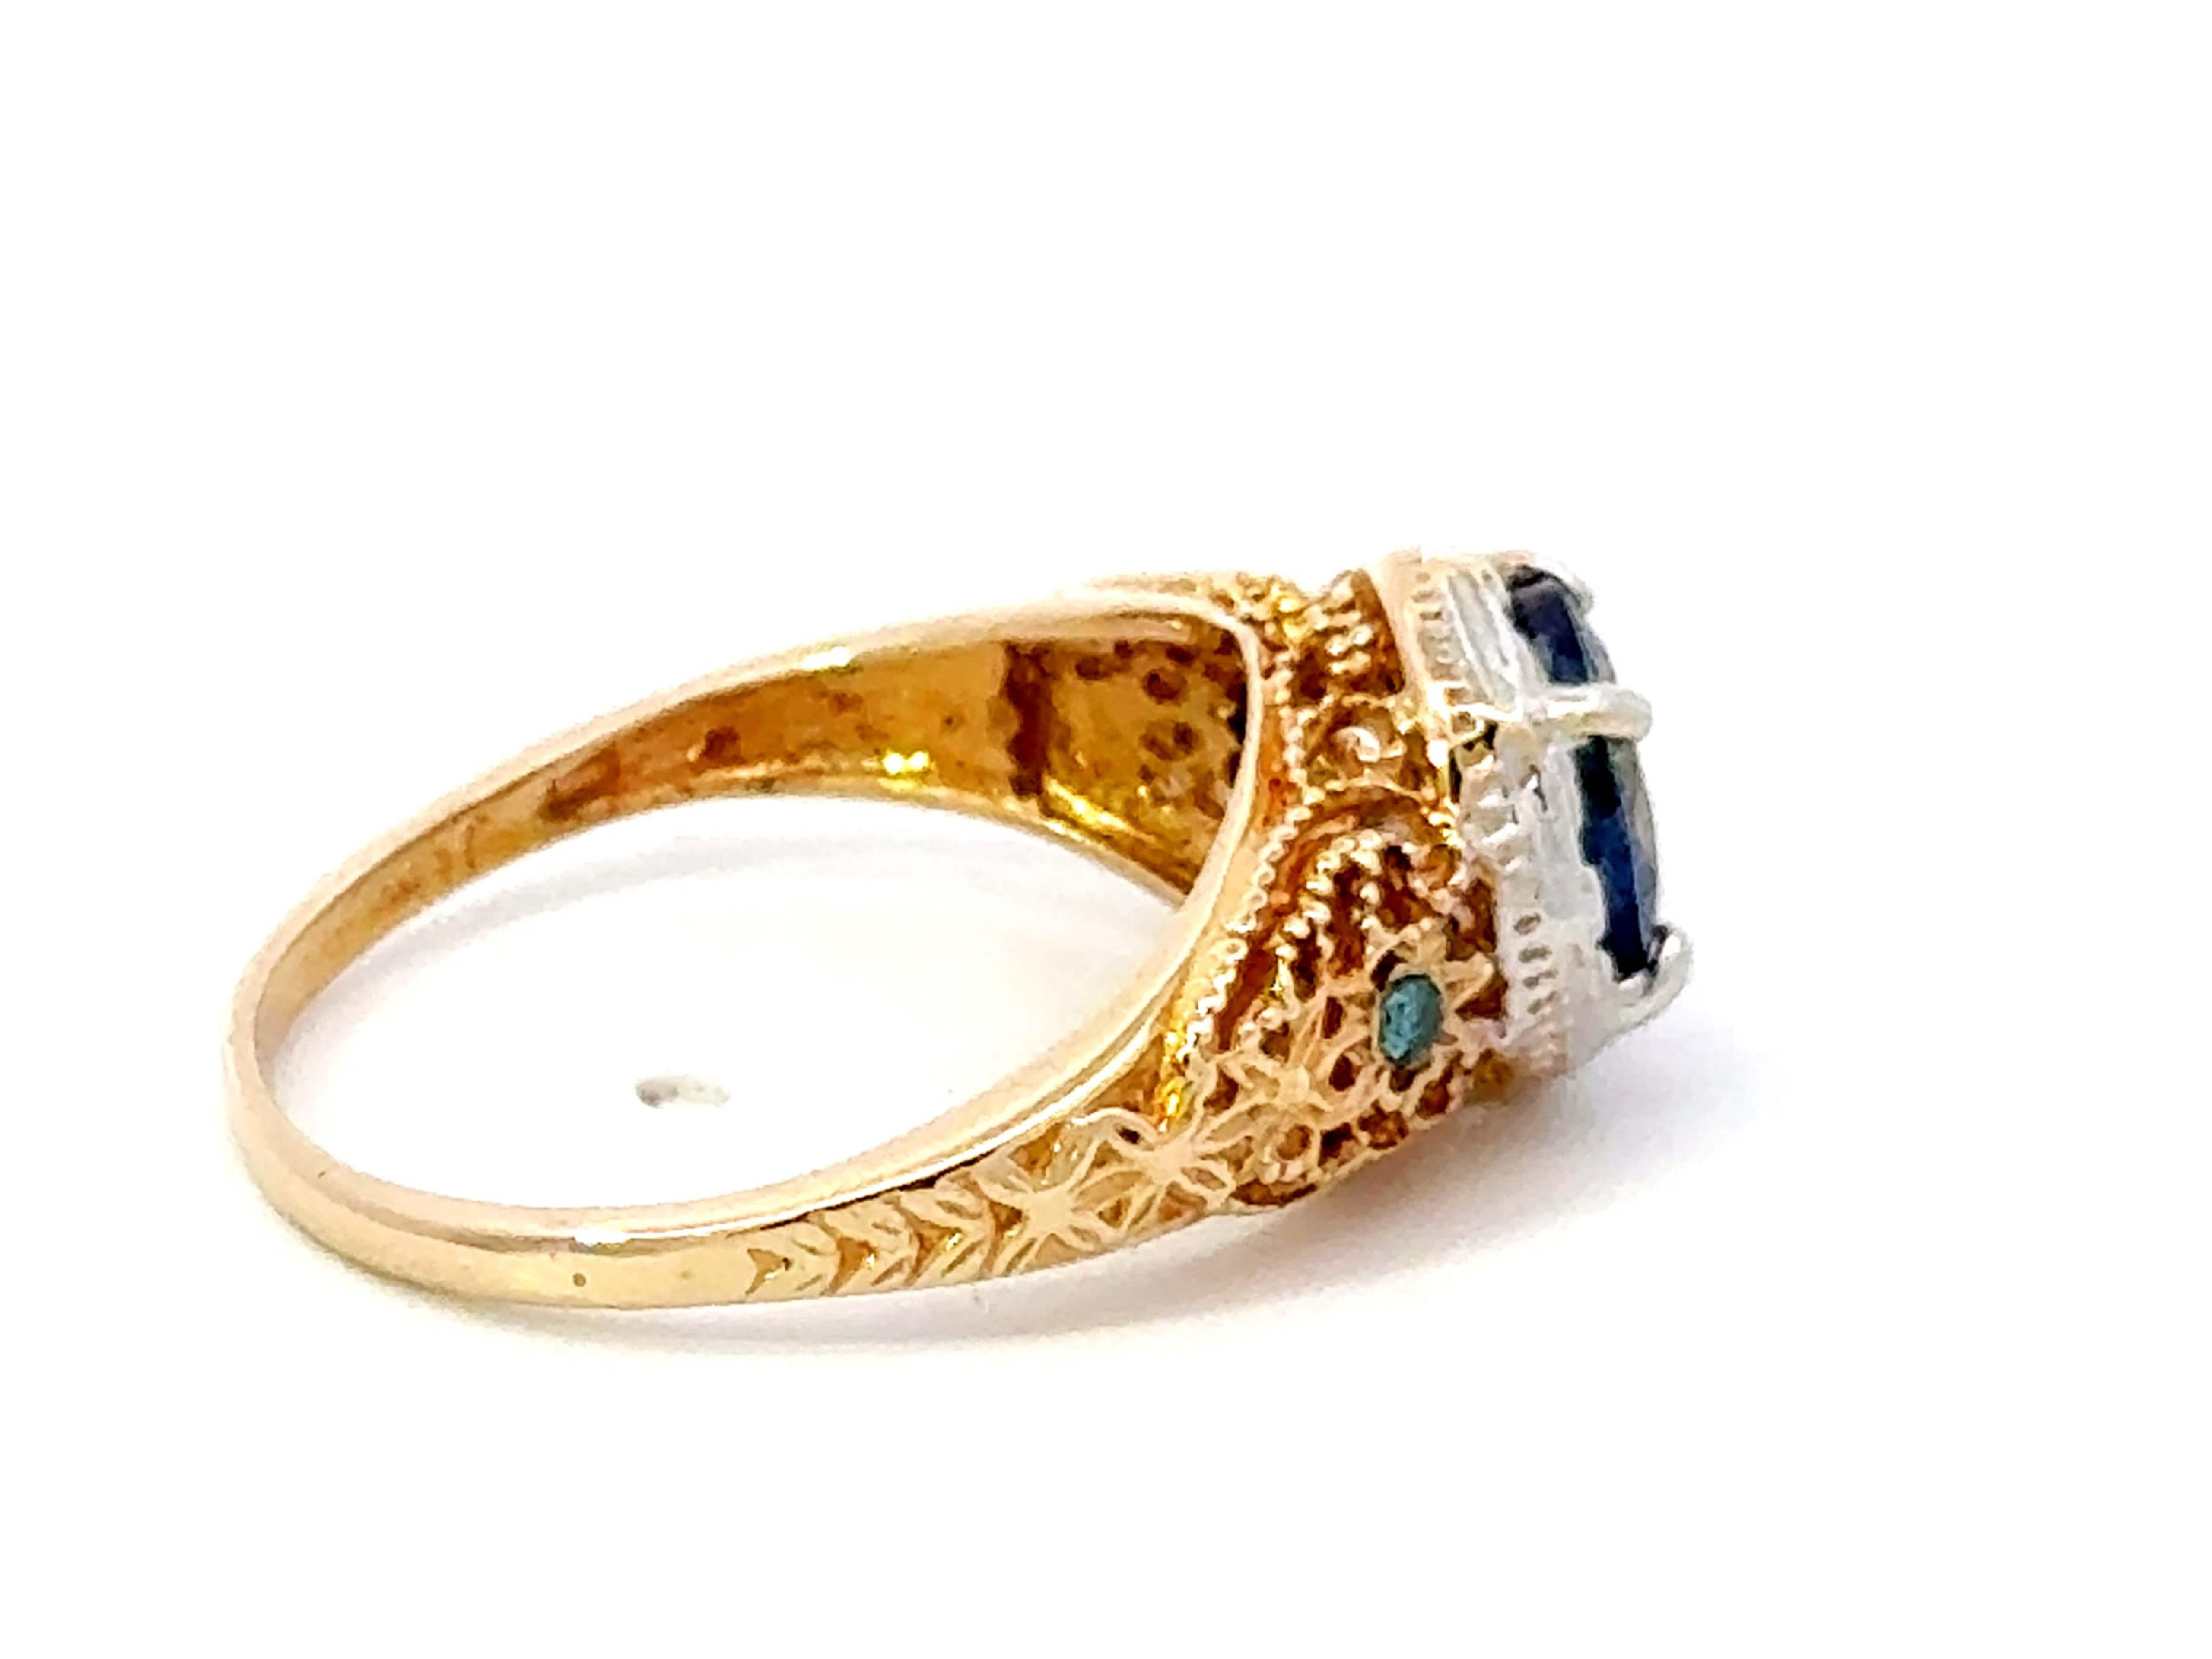 Blue Purple Round Tanzanite Filigree Ring 14k White and Yellow Gold In Excellent Condition For Sale In Honolulu, HI